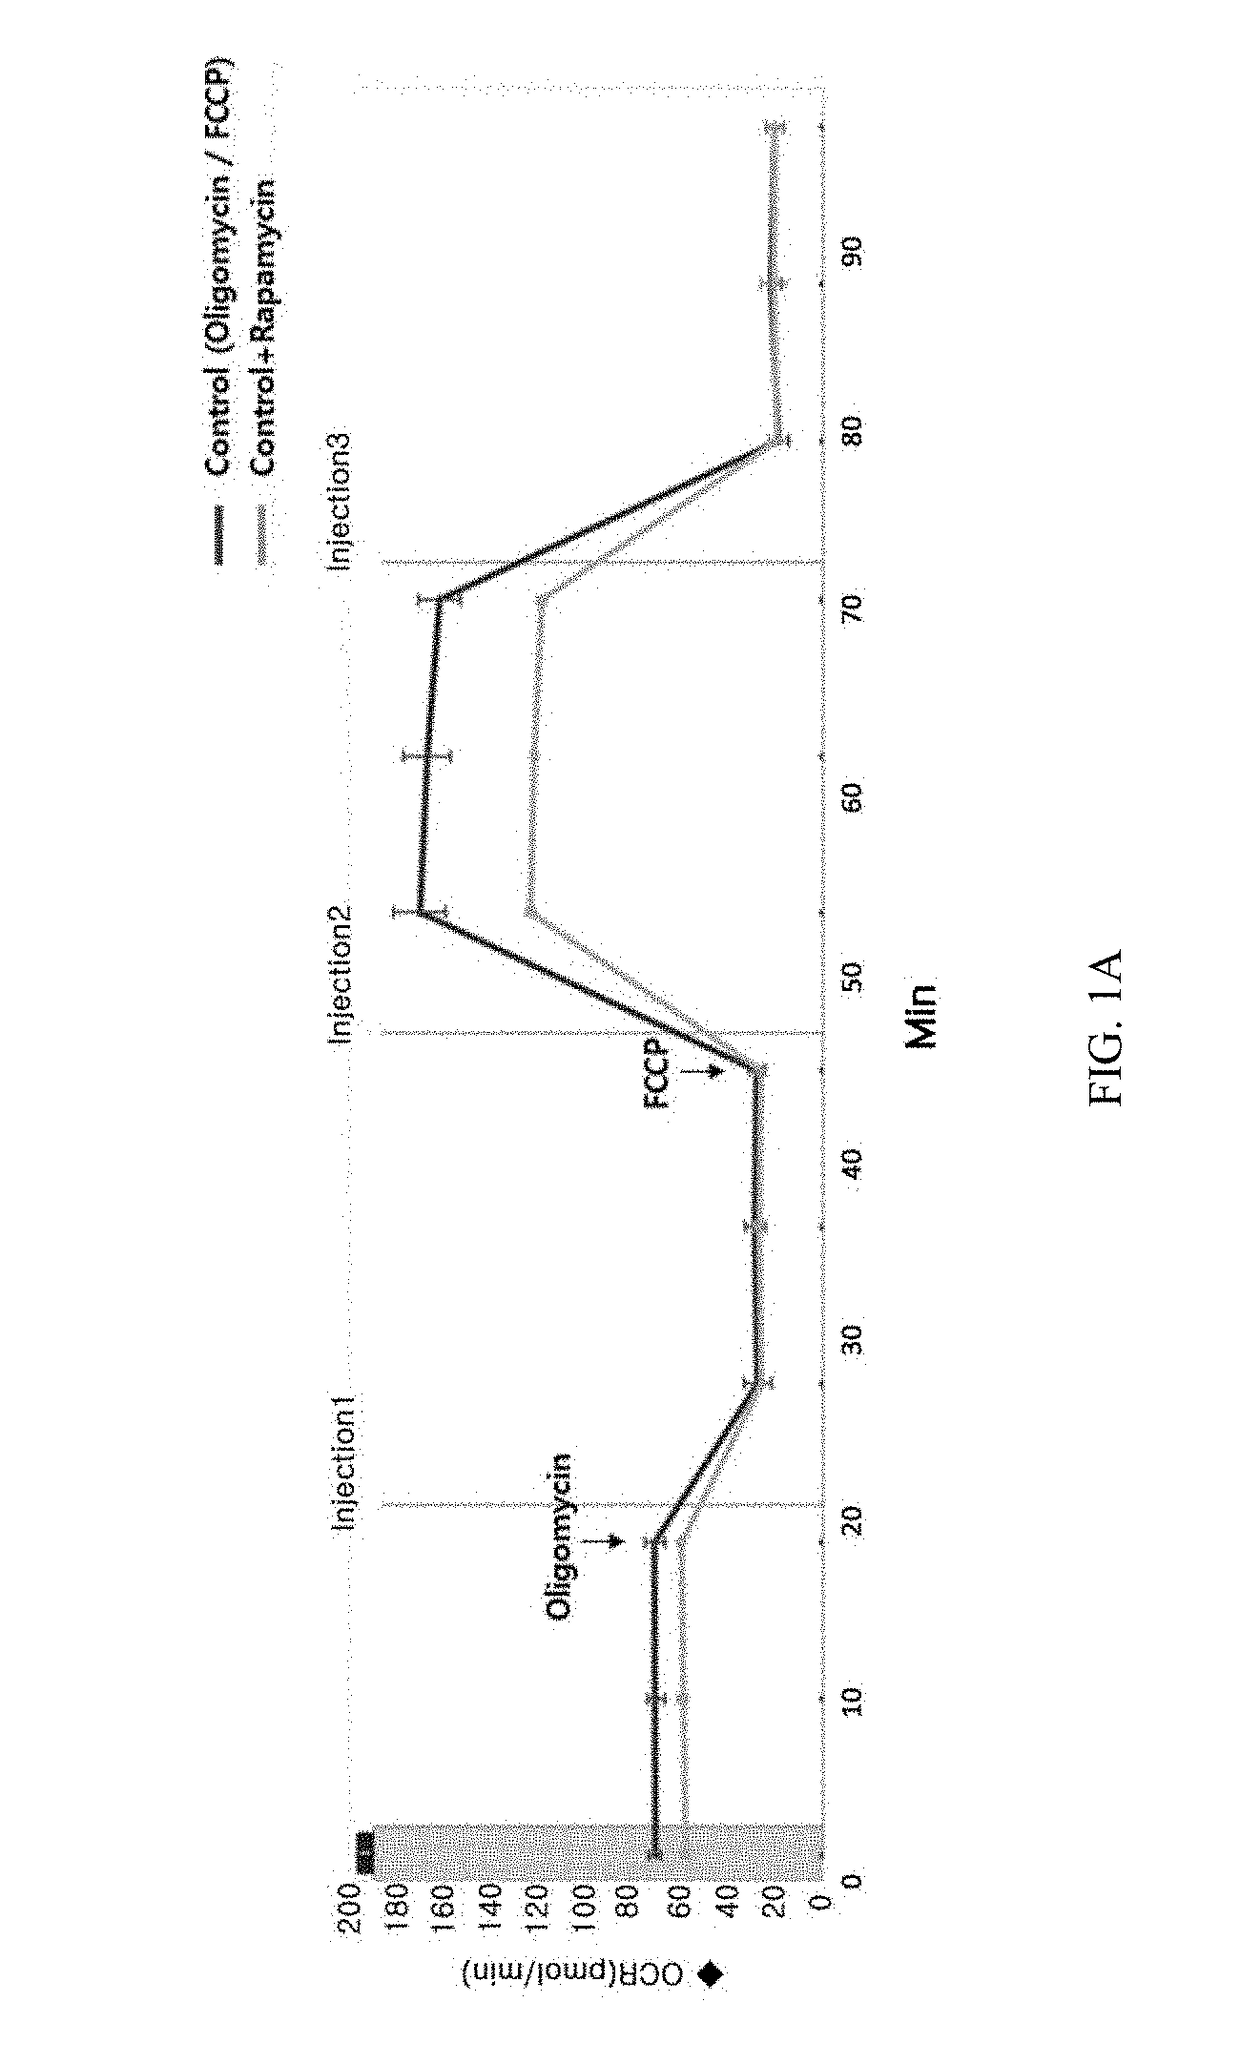 Composition for preventing or treating mitochondrial diseases caused by immunosuppressants, and immune diseases, containing metformin